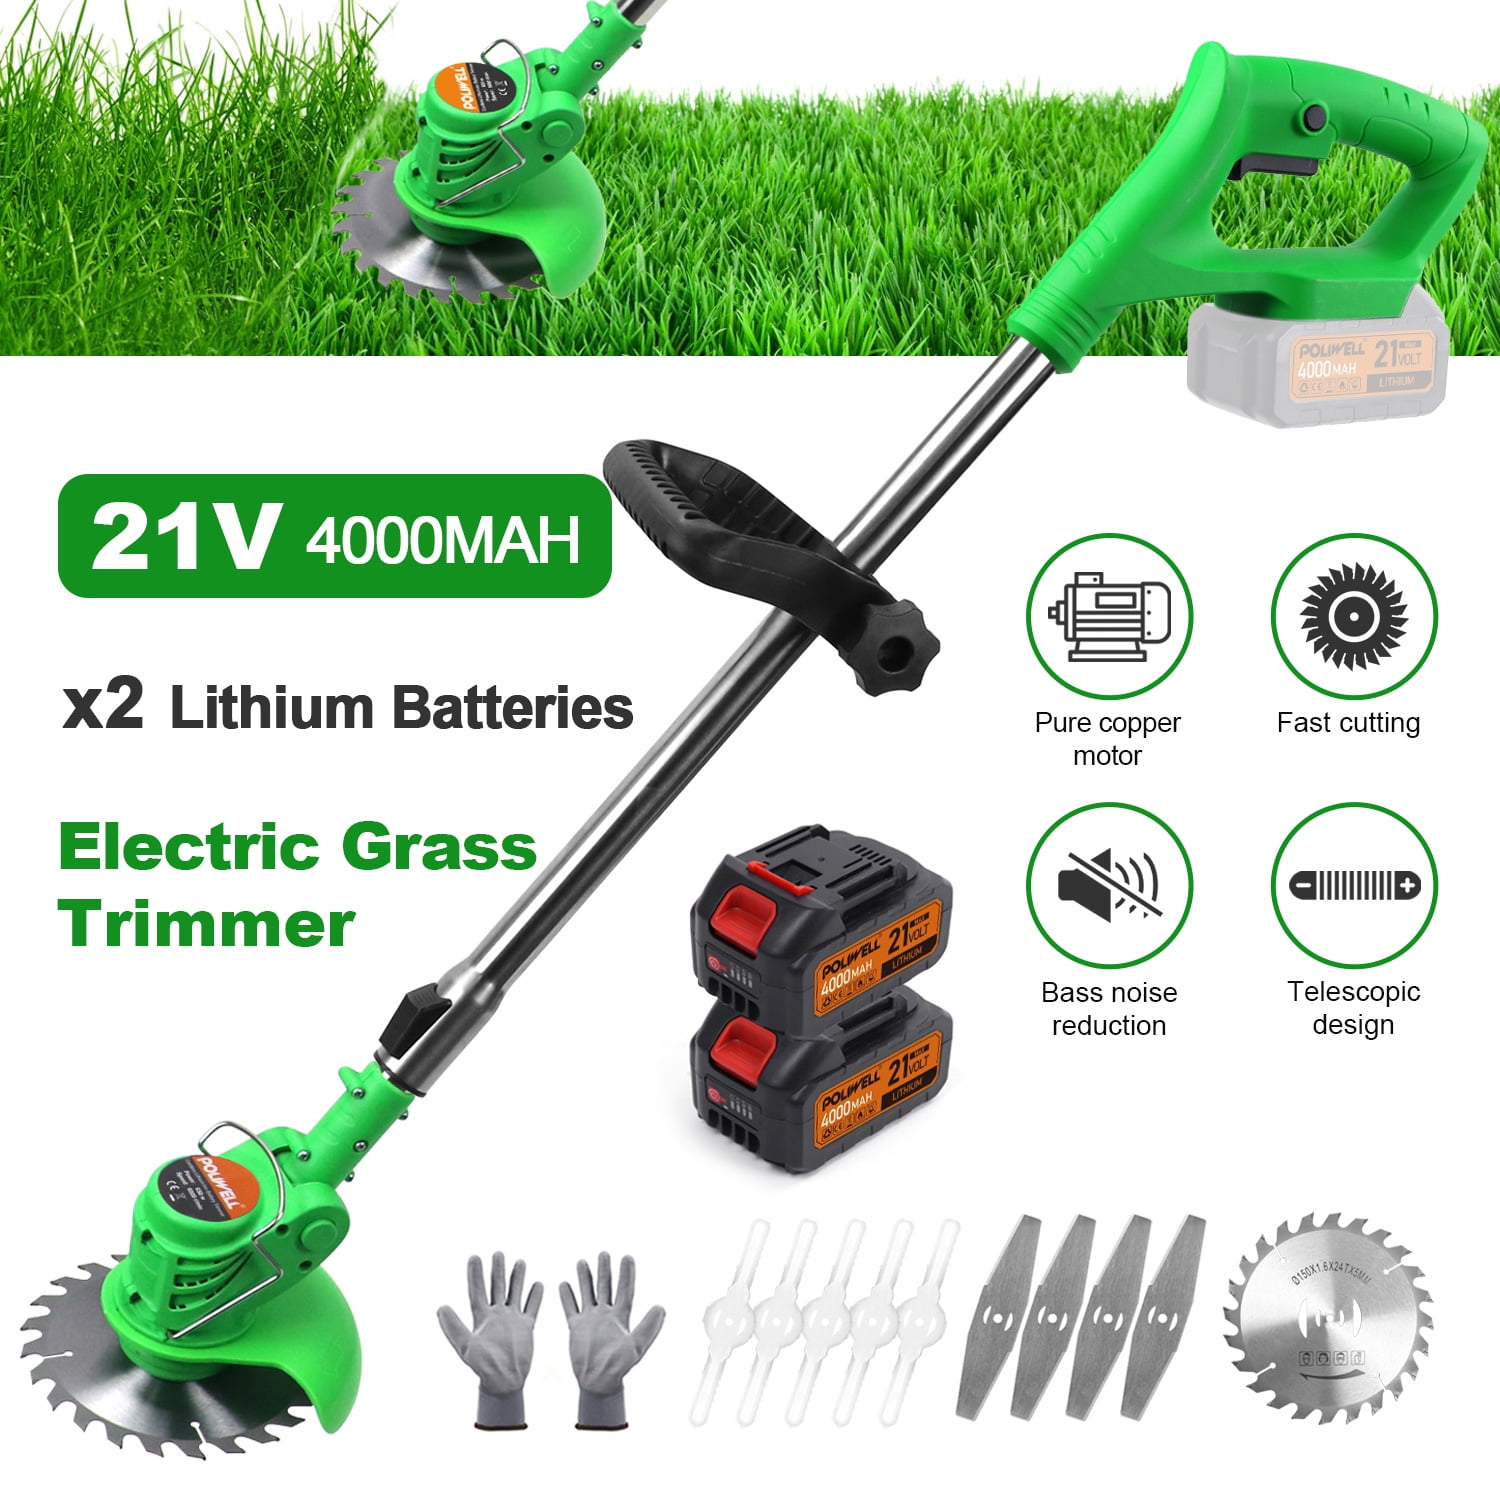 47 Inch Powerful Weed Eater for Lawn Yard，Garden Bush Trimming & Pruning Cordless String Trimmer Battery Powered 42V Lightweight Weed Wacker with 2 Li-Ion Battery 1 Charger and 11 Cutting Blades 